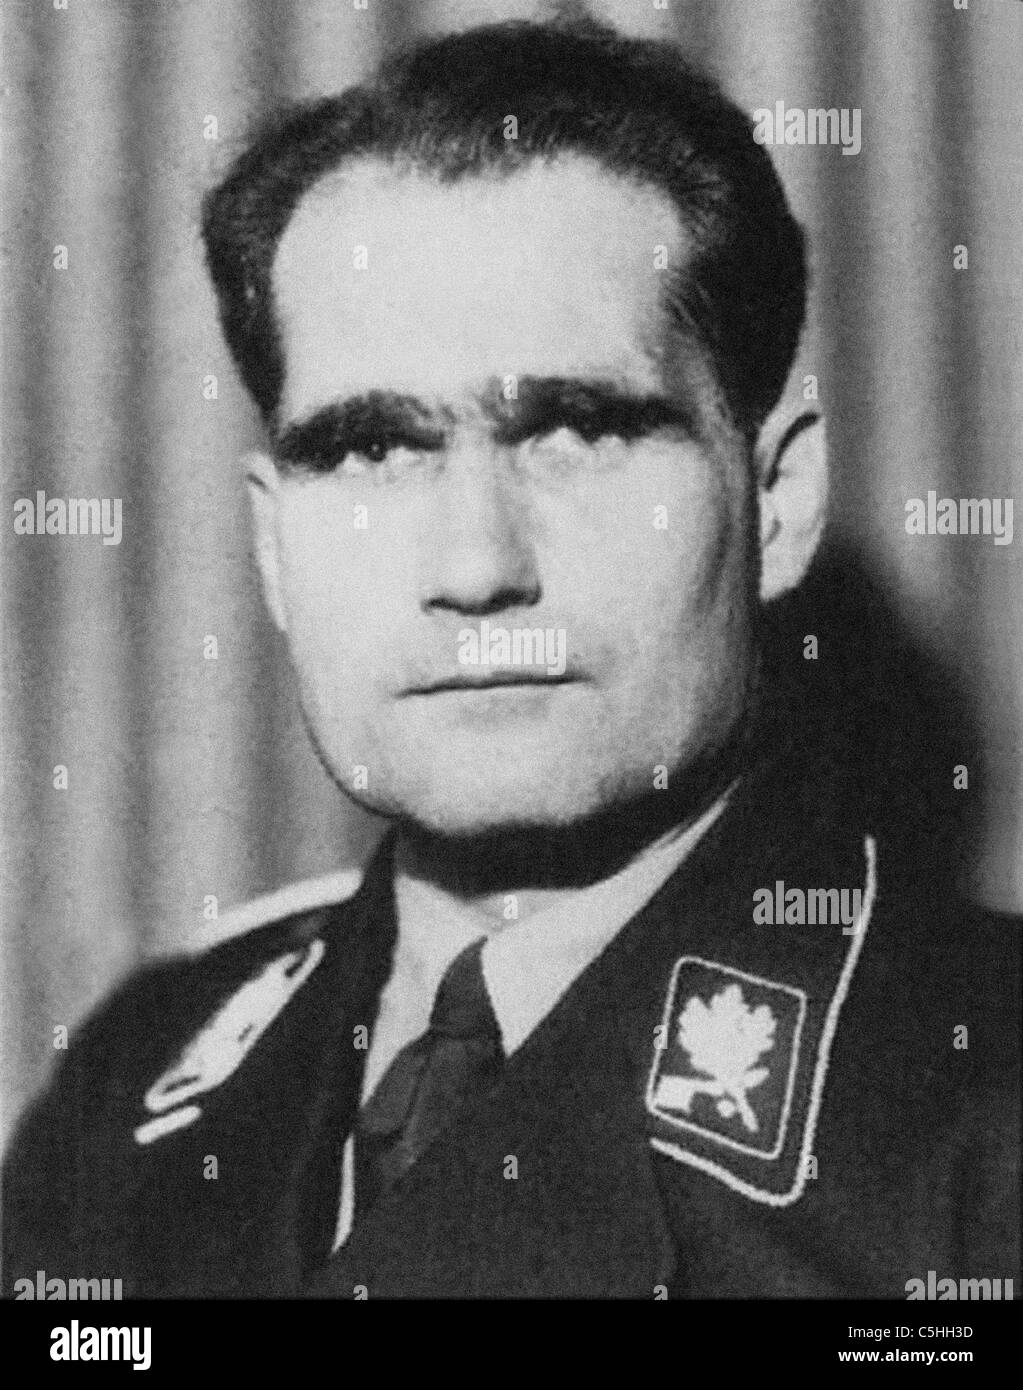 Rudolf Hess - Hitler's war time deputy was a prominent Nazi politician. From the archives of Press Portrait Service Stock Photo